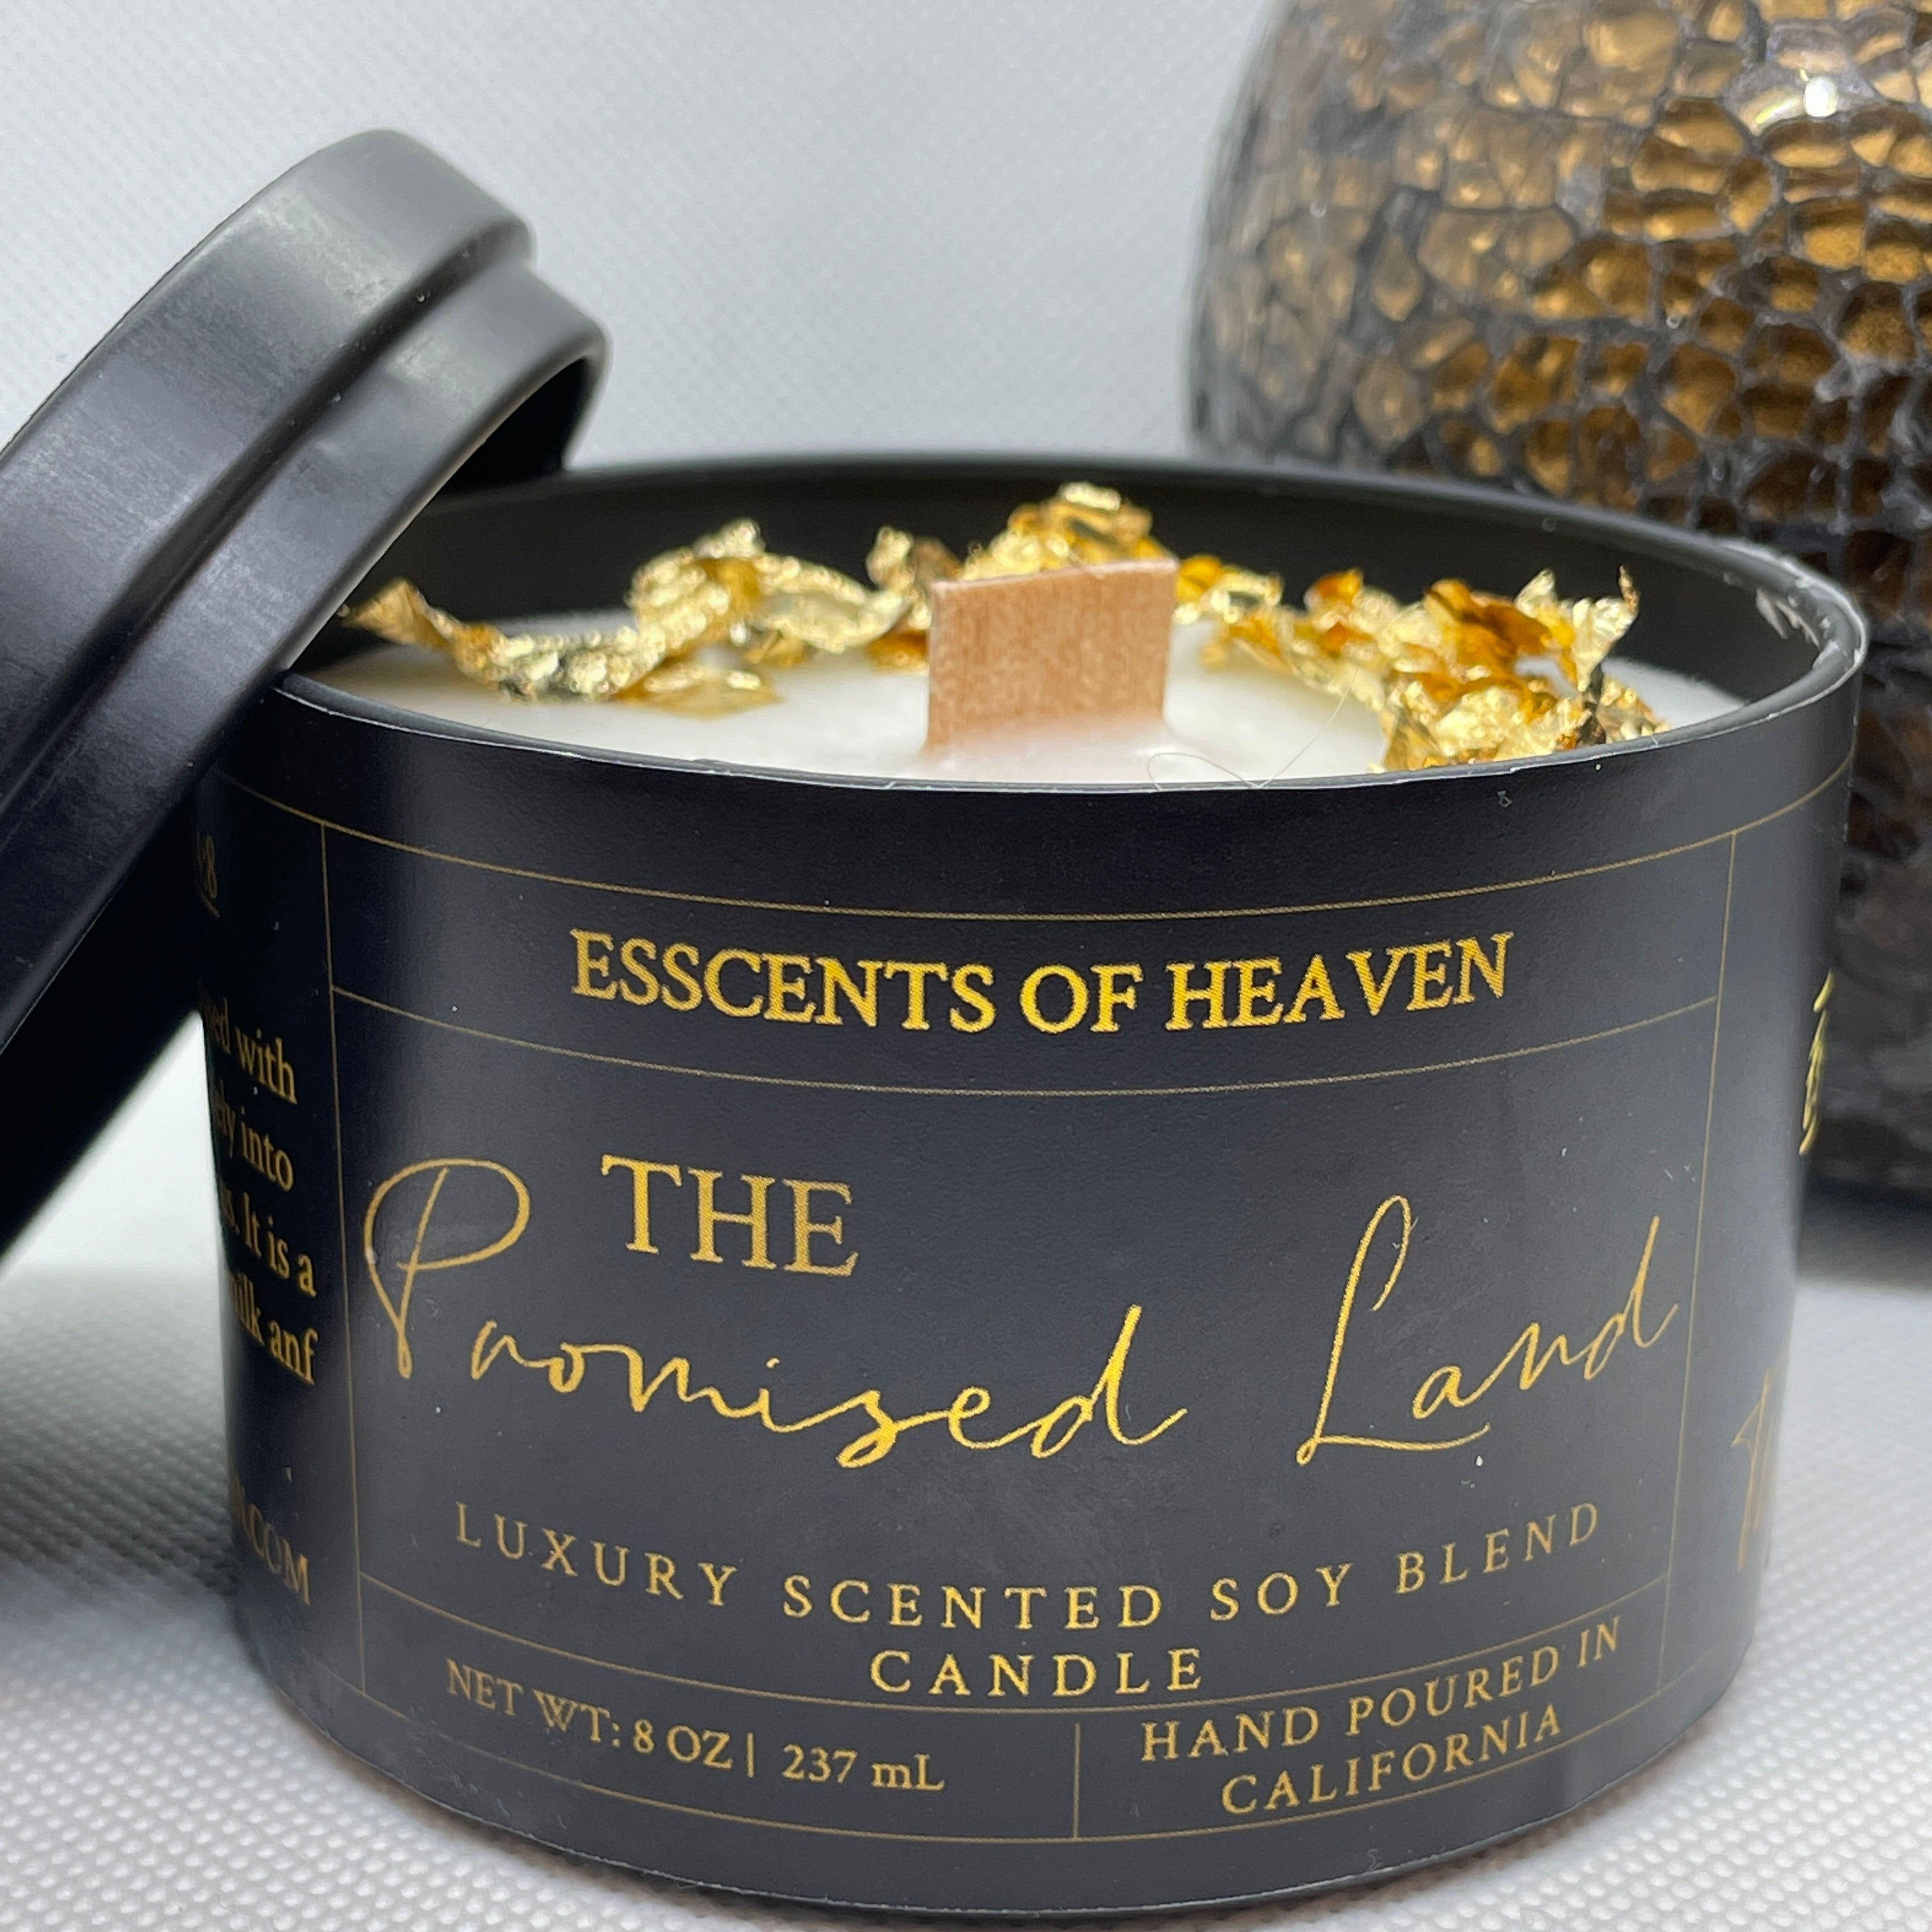 "The Promised Land" Gold Leaf Candle